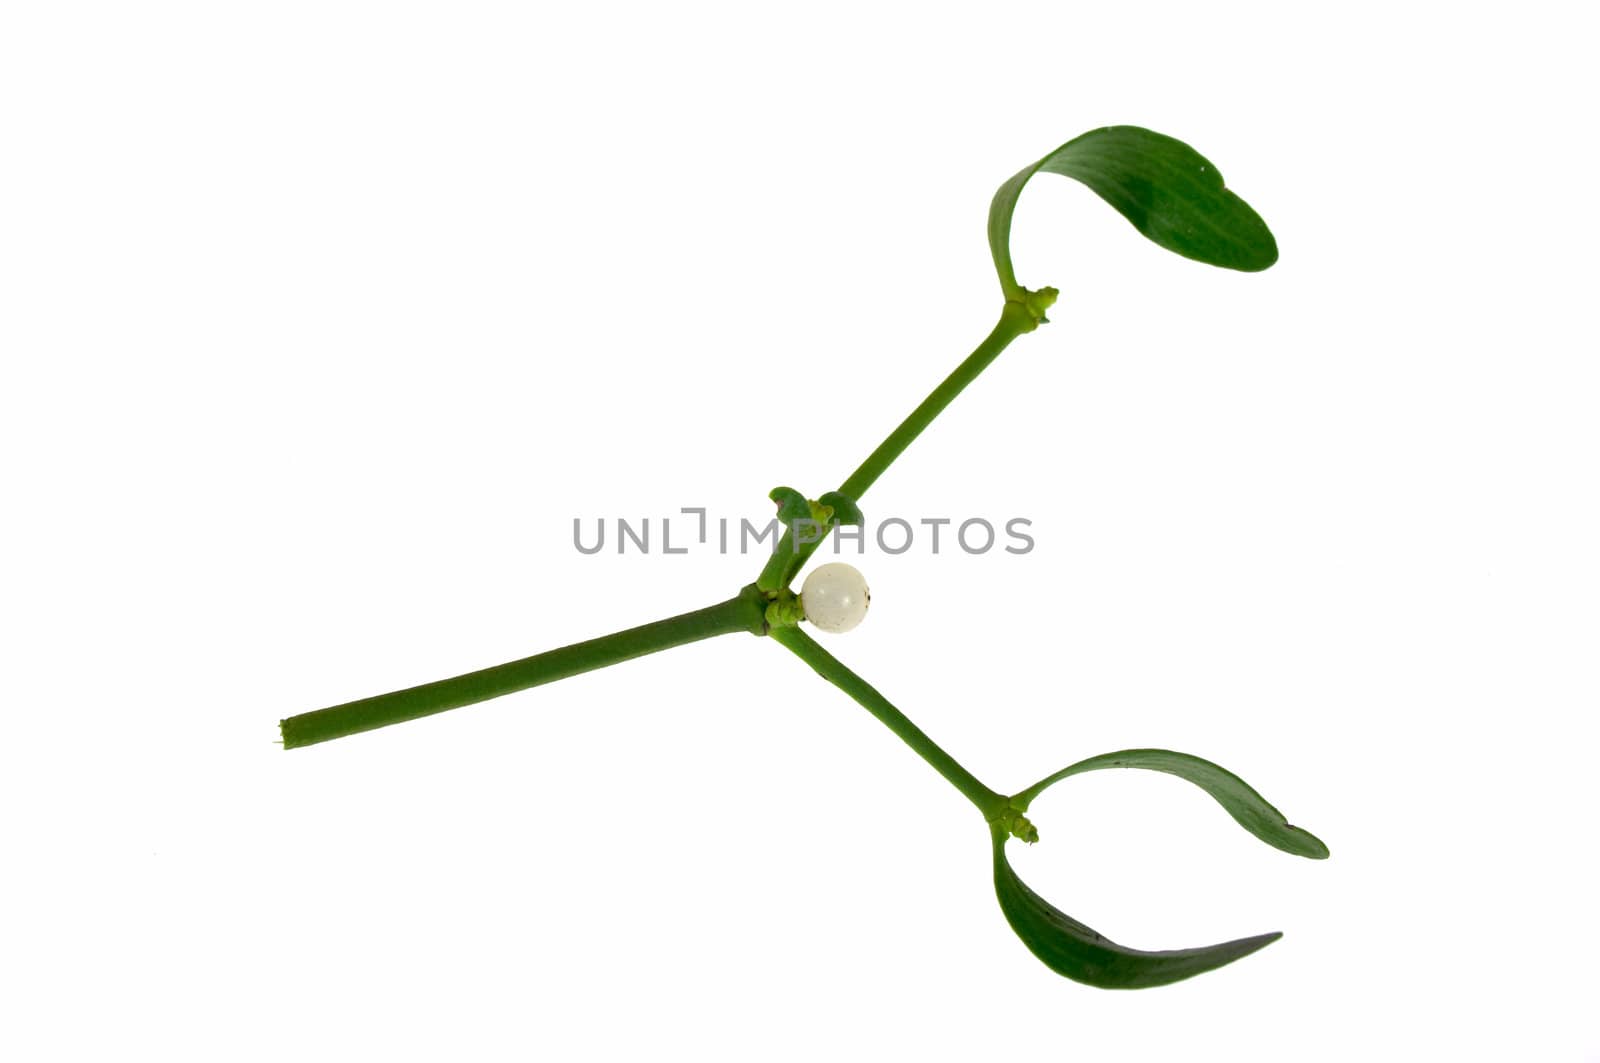 Mistletoe sprout with leafs and berries, isolated on  white background.